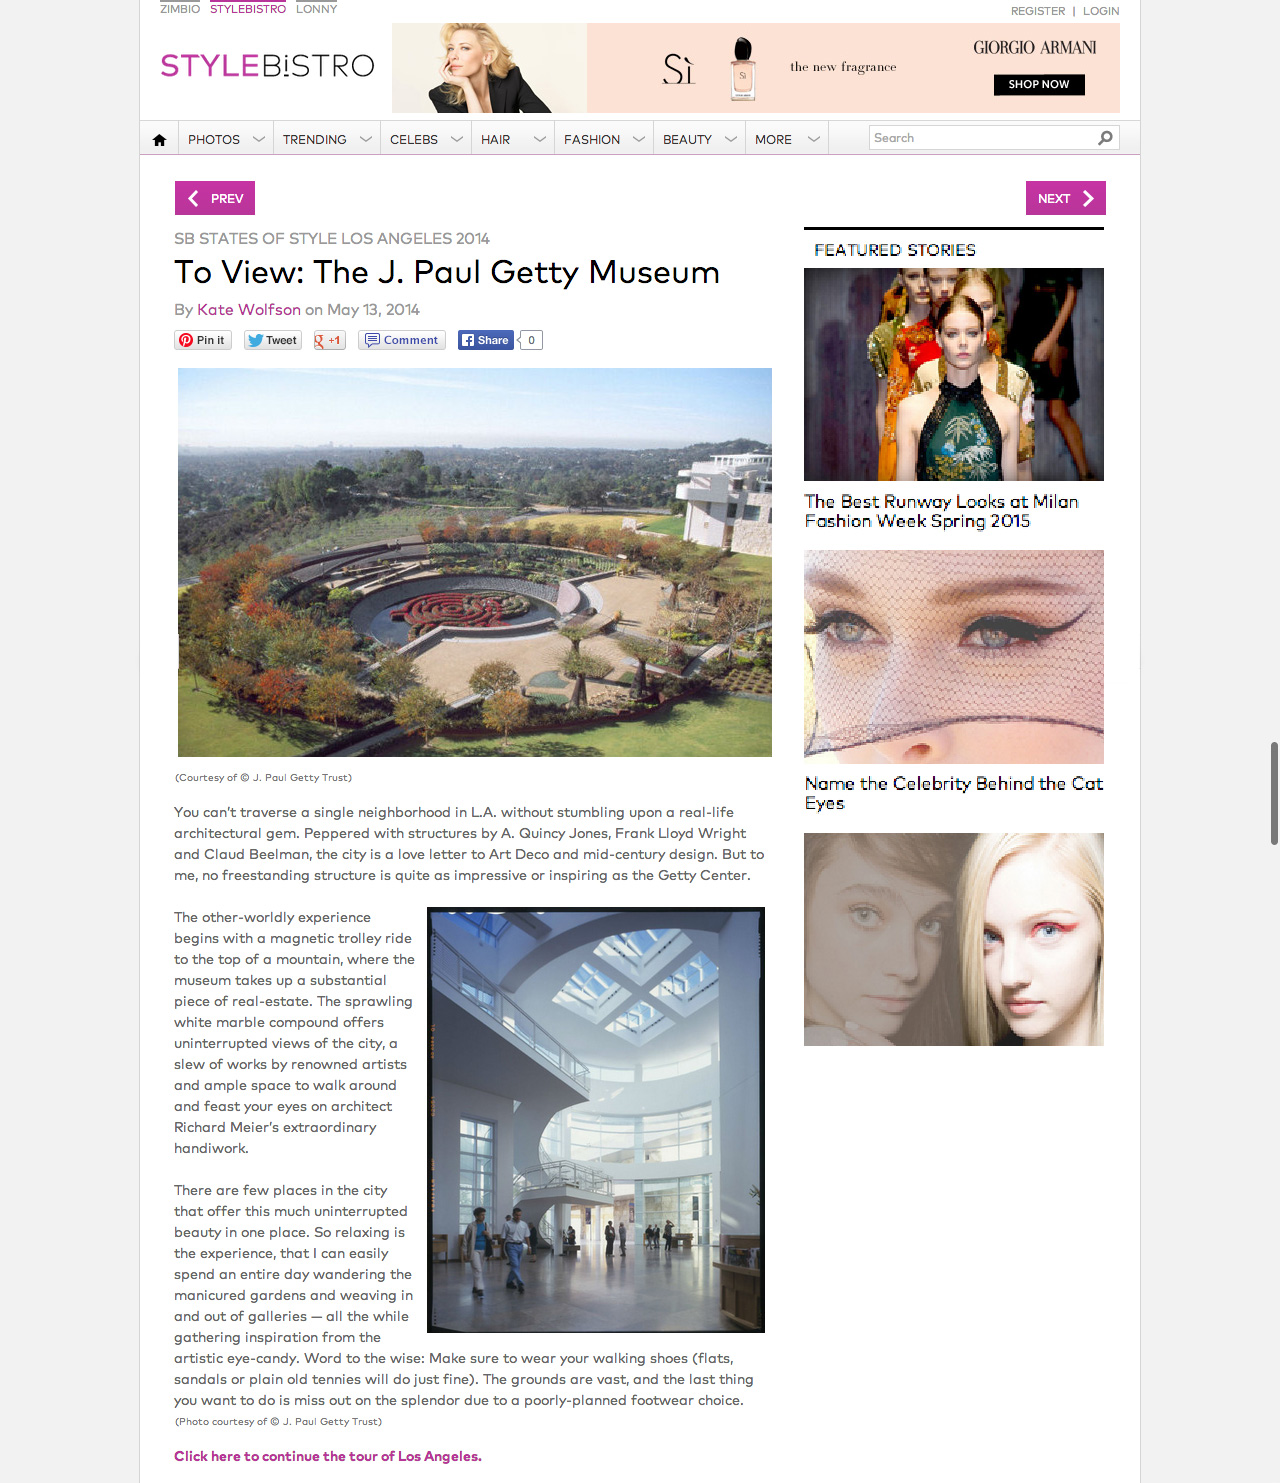 To View: The J. Paul Getty Museum for Style Bistro by Kate Wolfson